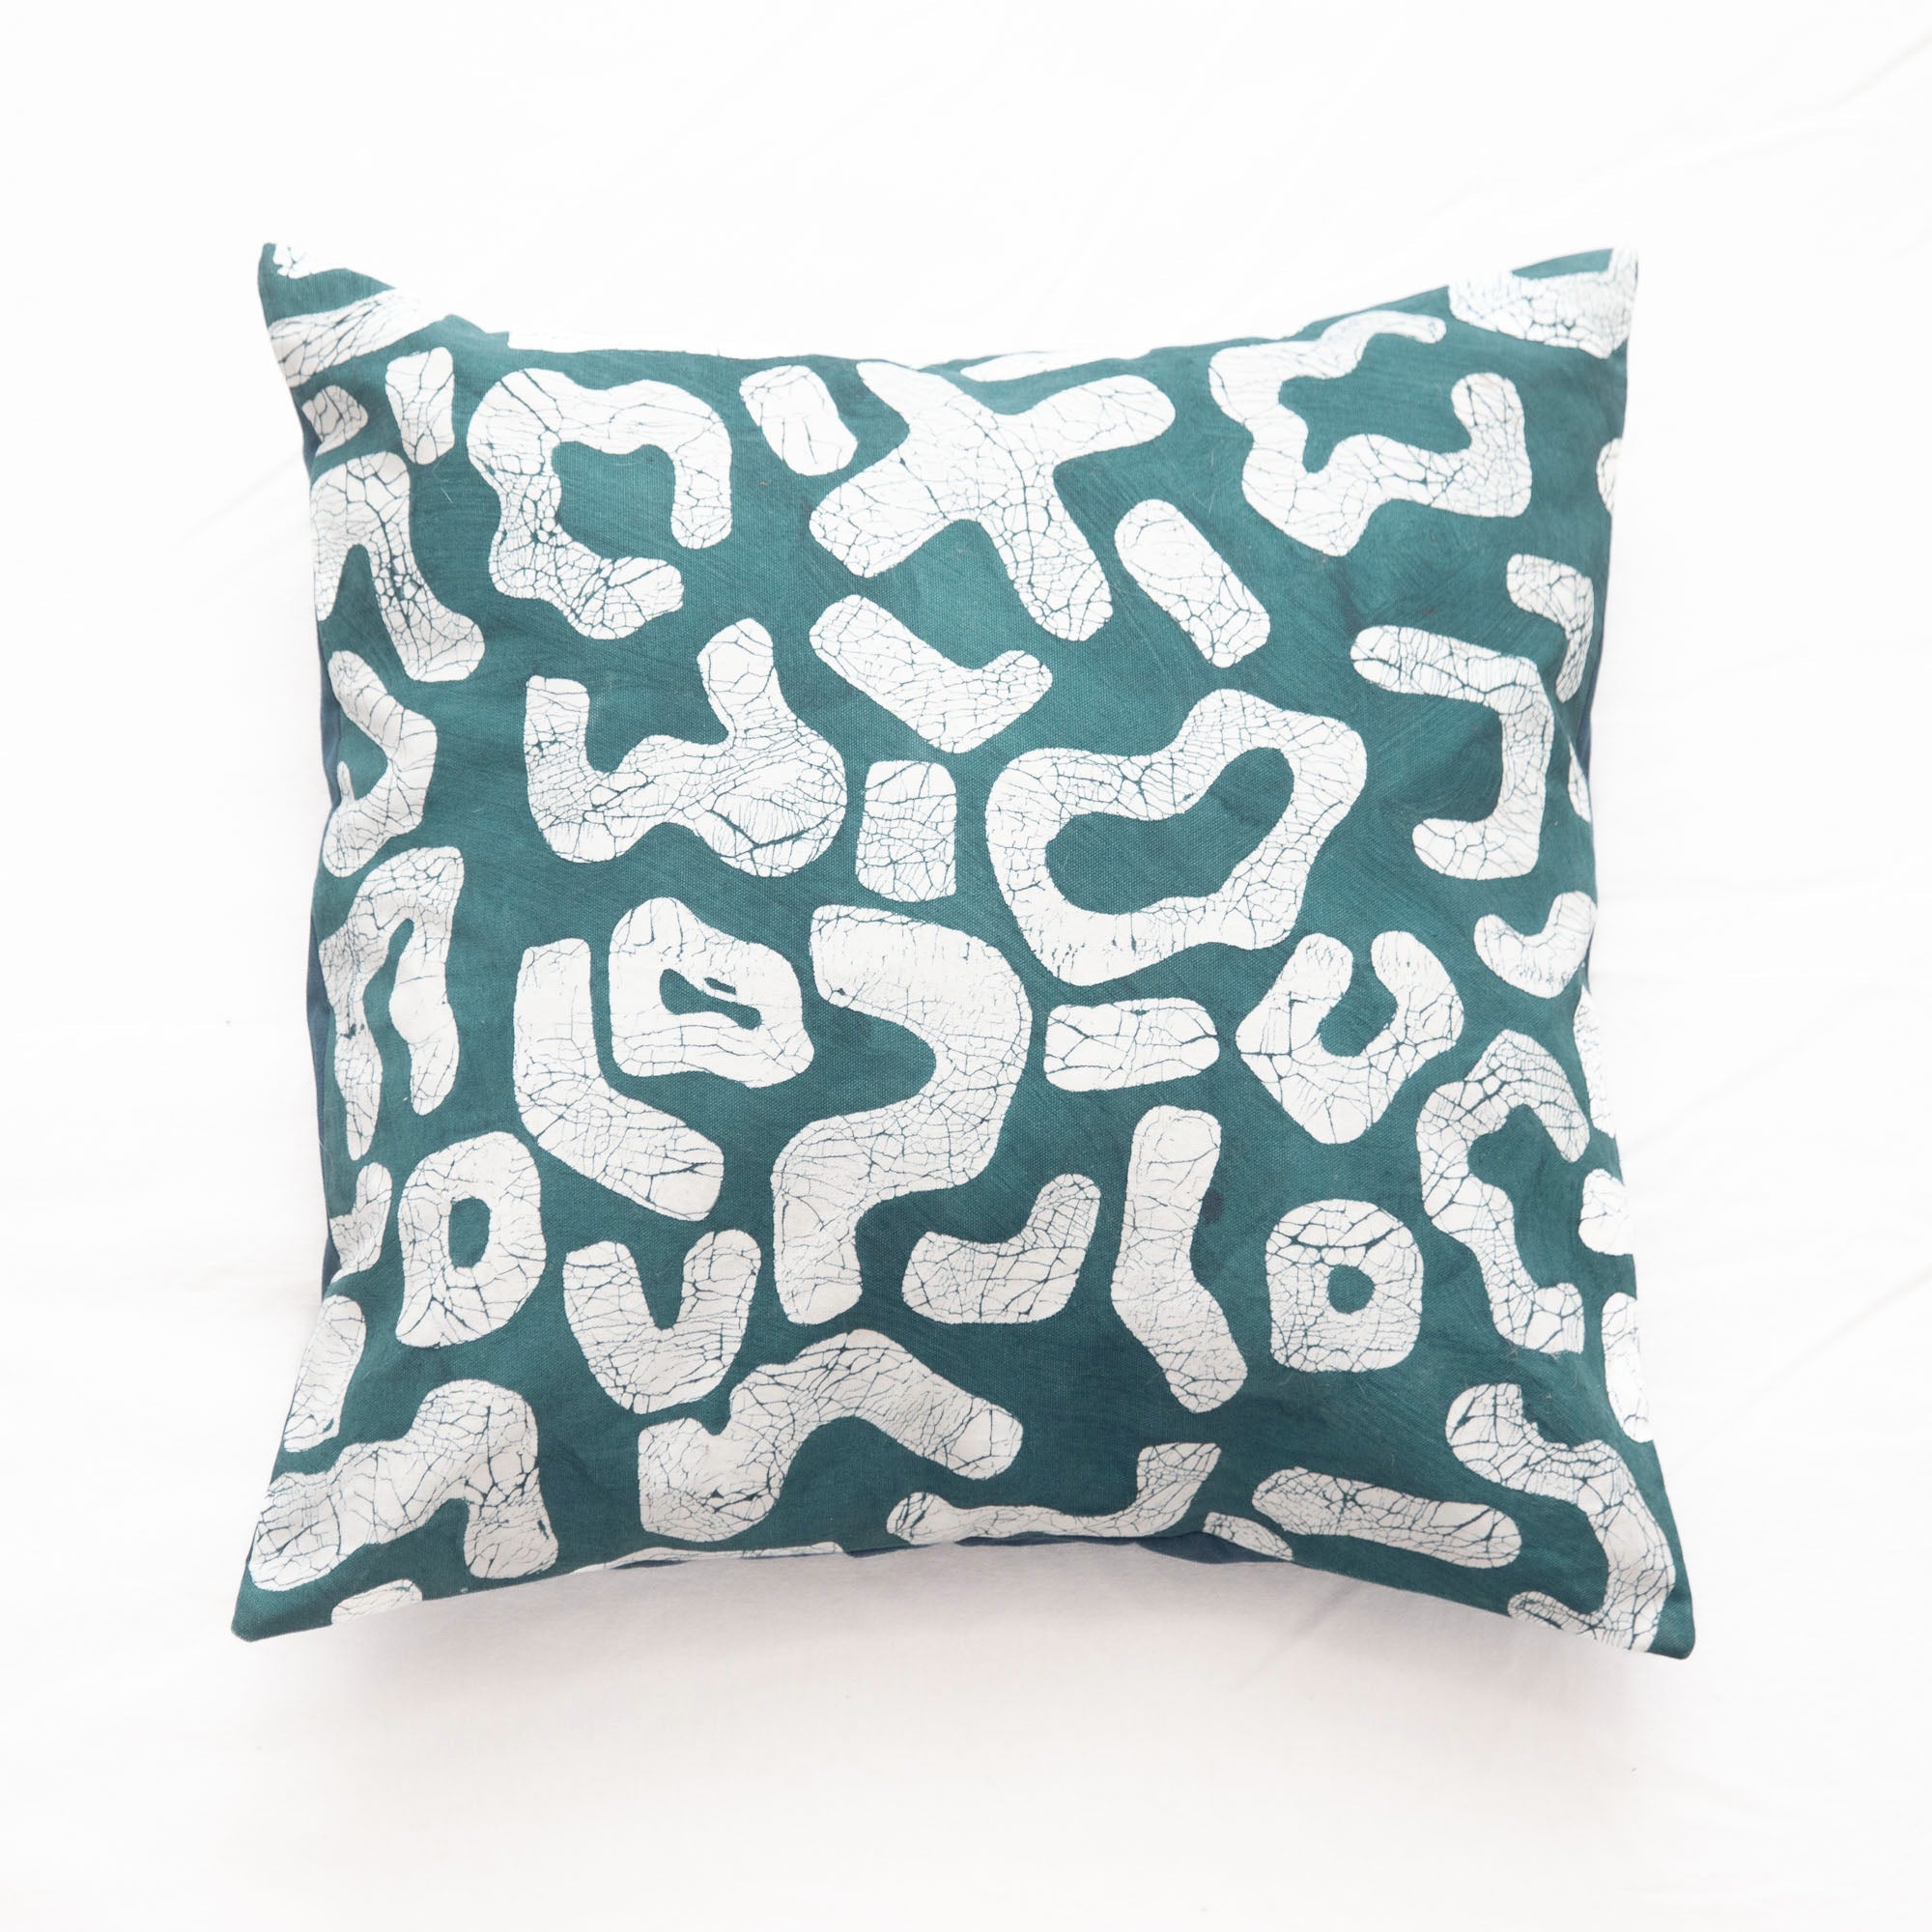 The perfect teal cushion cover adorned with intricate African Kuba patterns, made from 100% cotton.